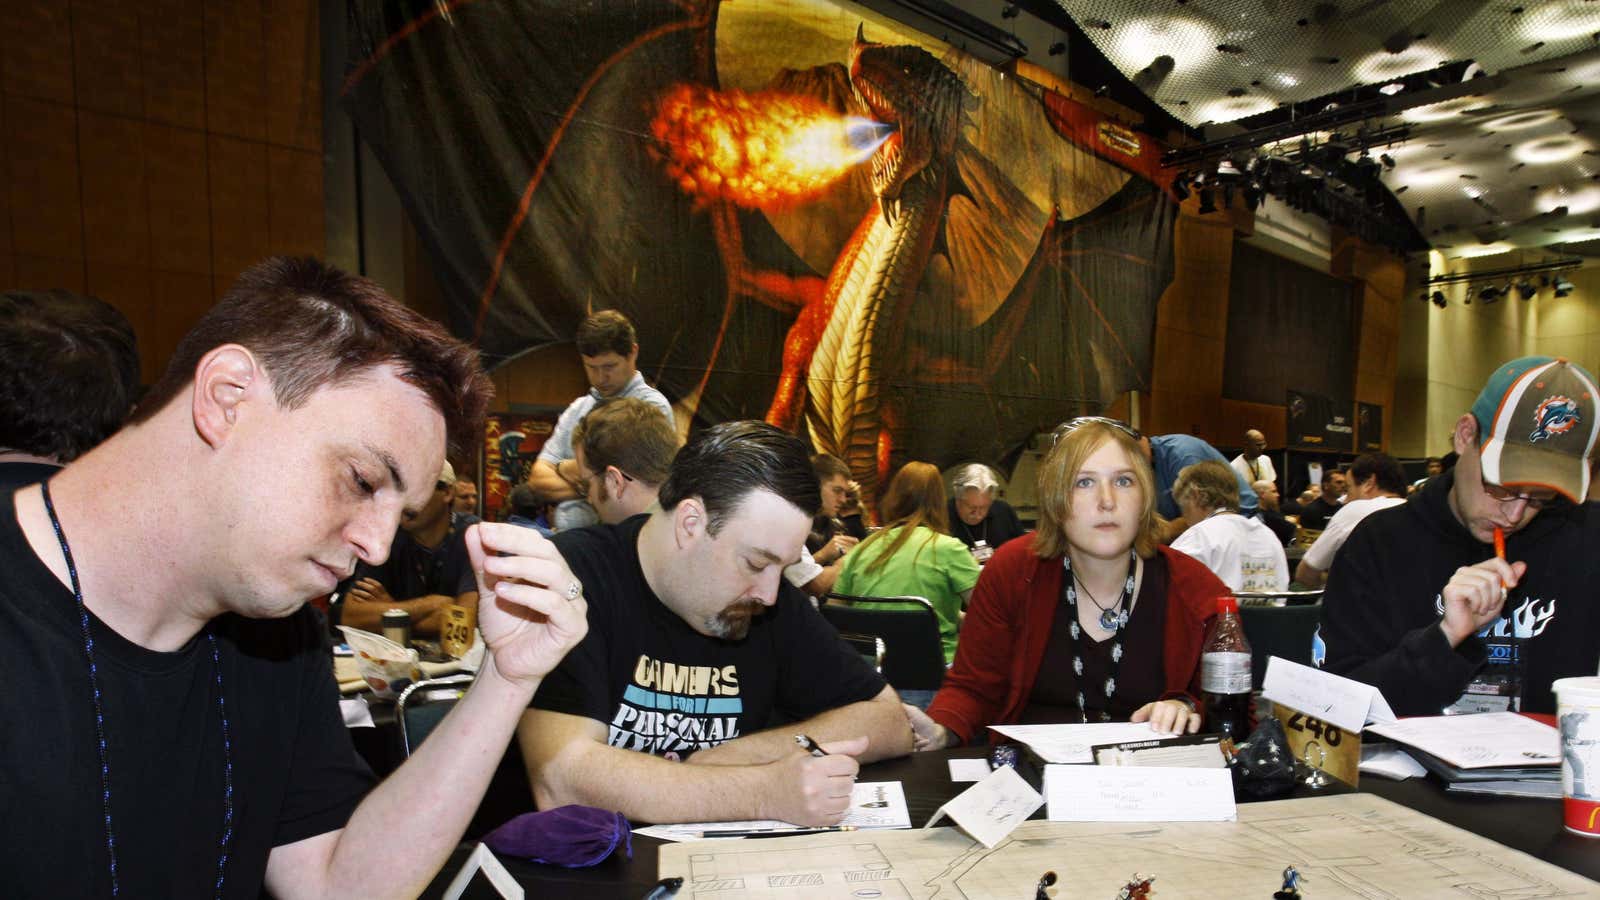 Can the hobbyist game industry move away from conferences?